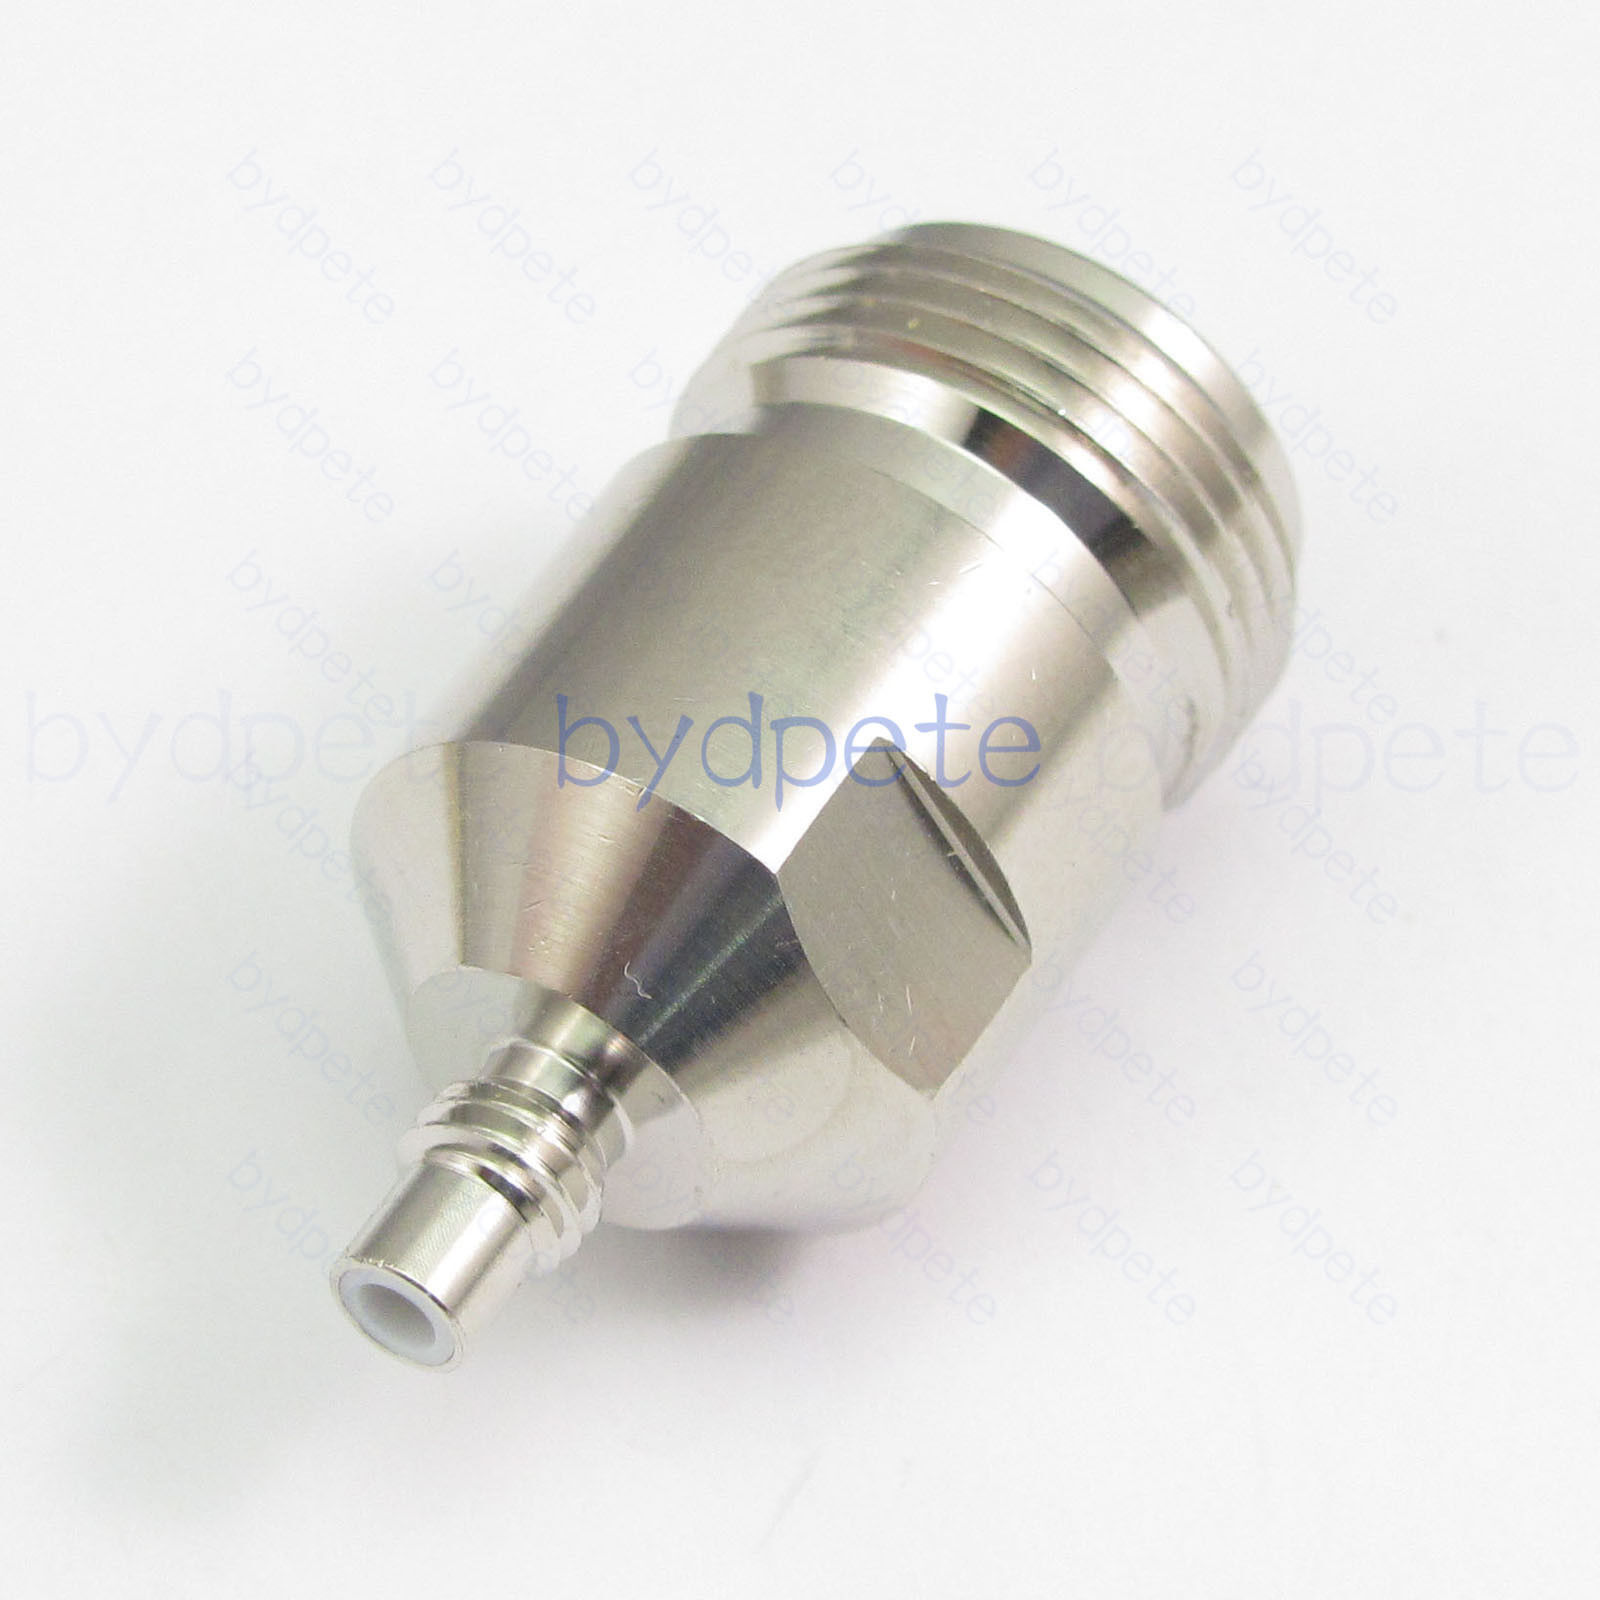 SMC Female Jack to N Female Jack Straight RF Connector Adapter bydpete BYDB450SMCF